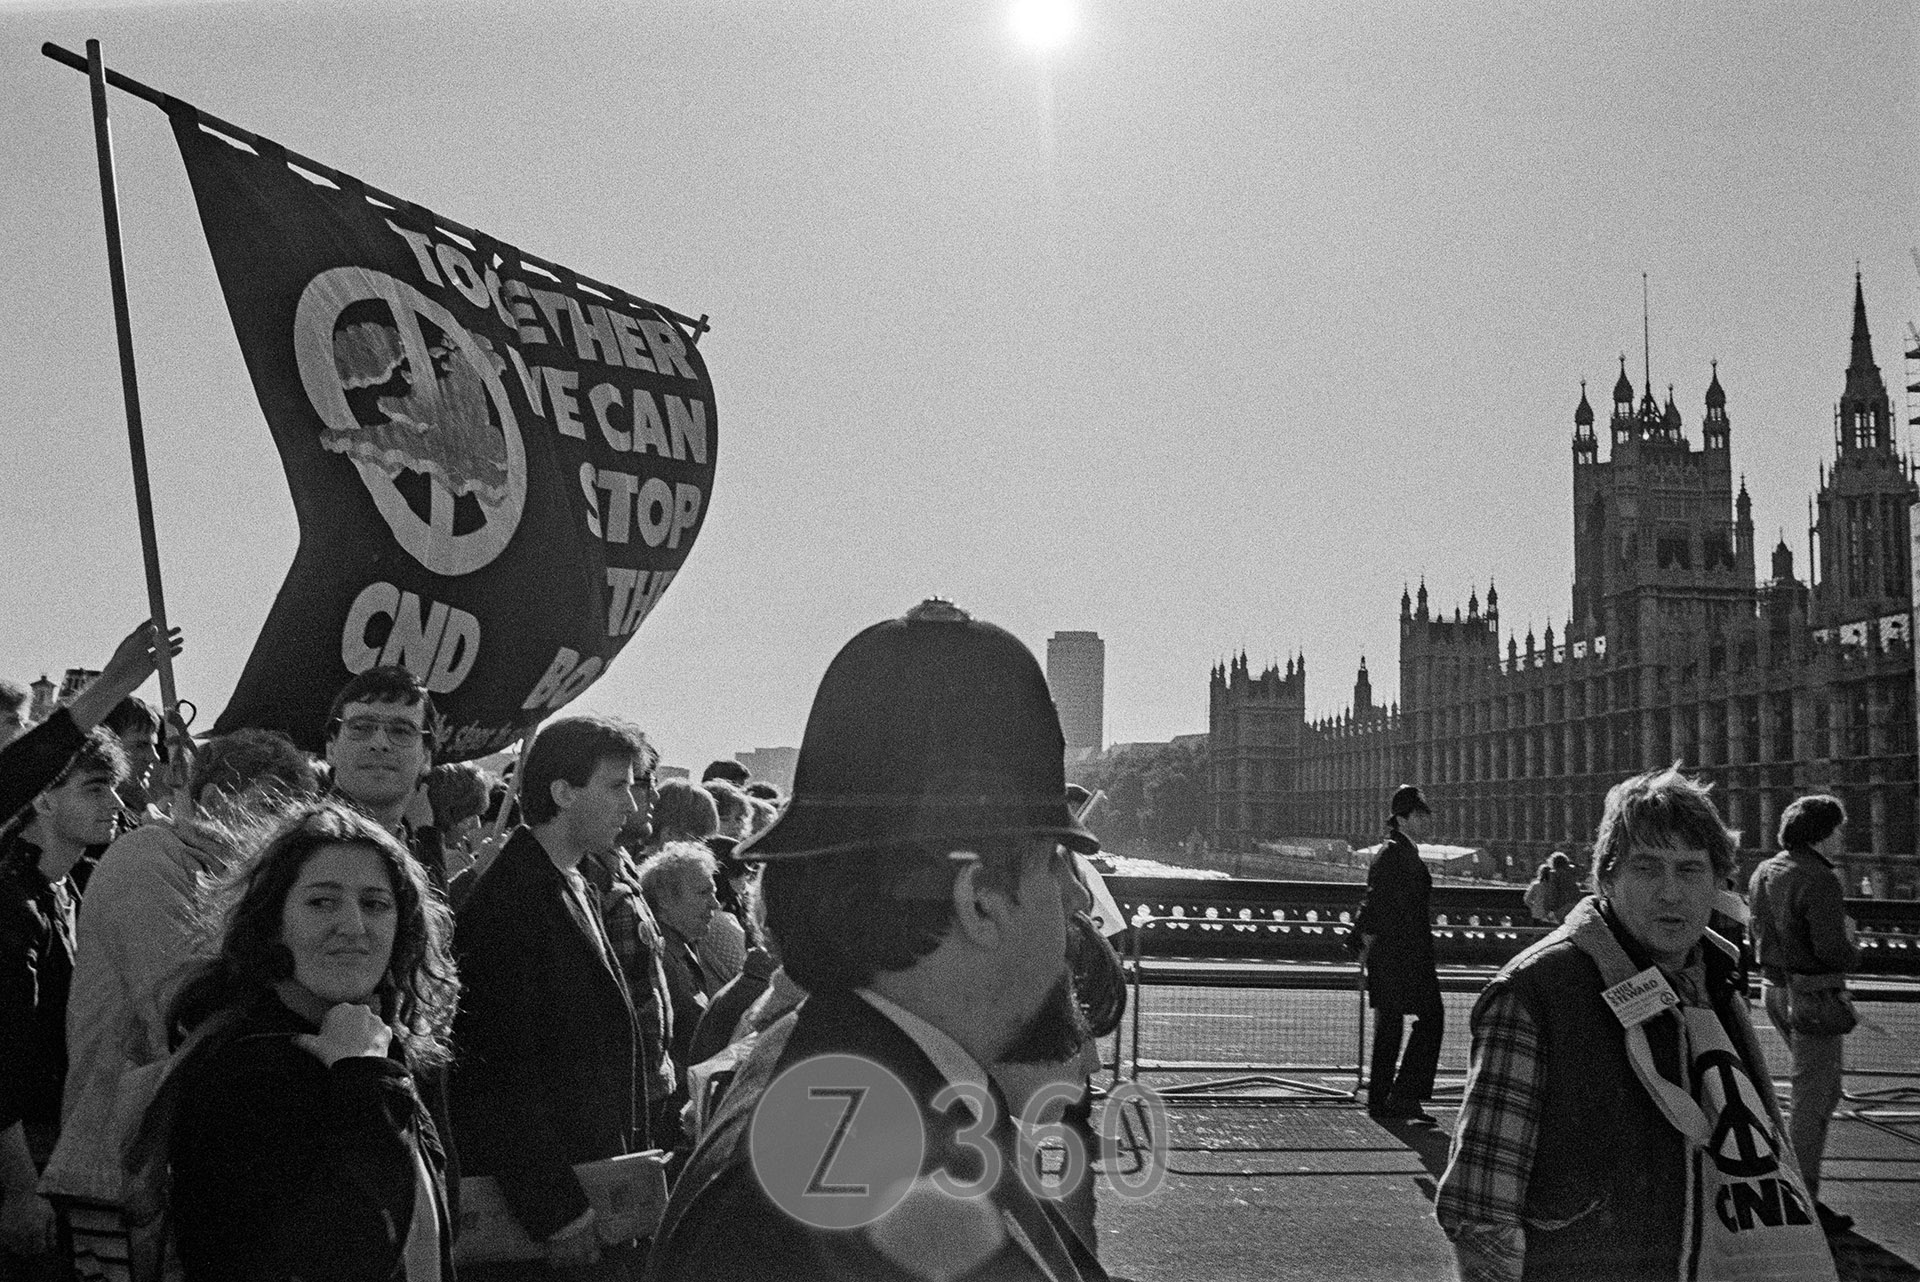 CND Rally against Cruise Missiles, October 1983